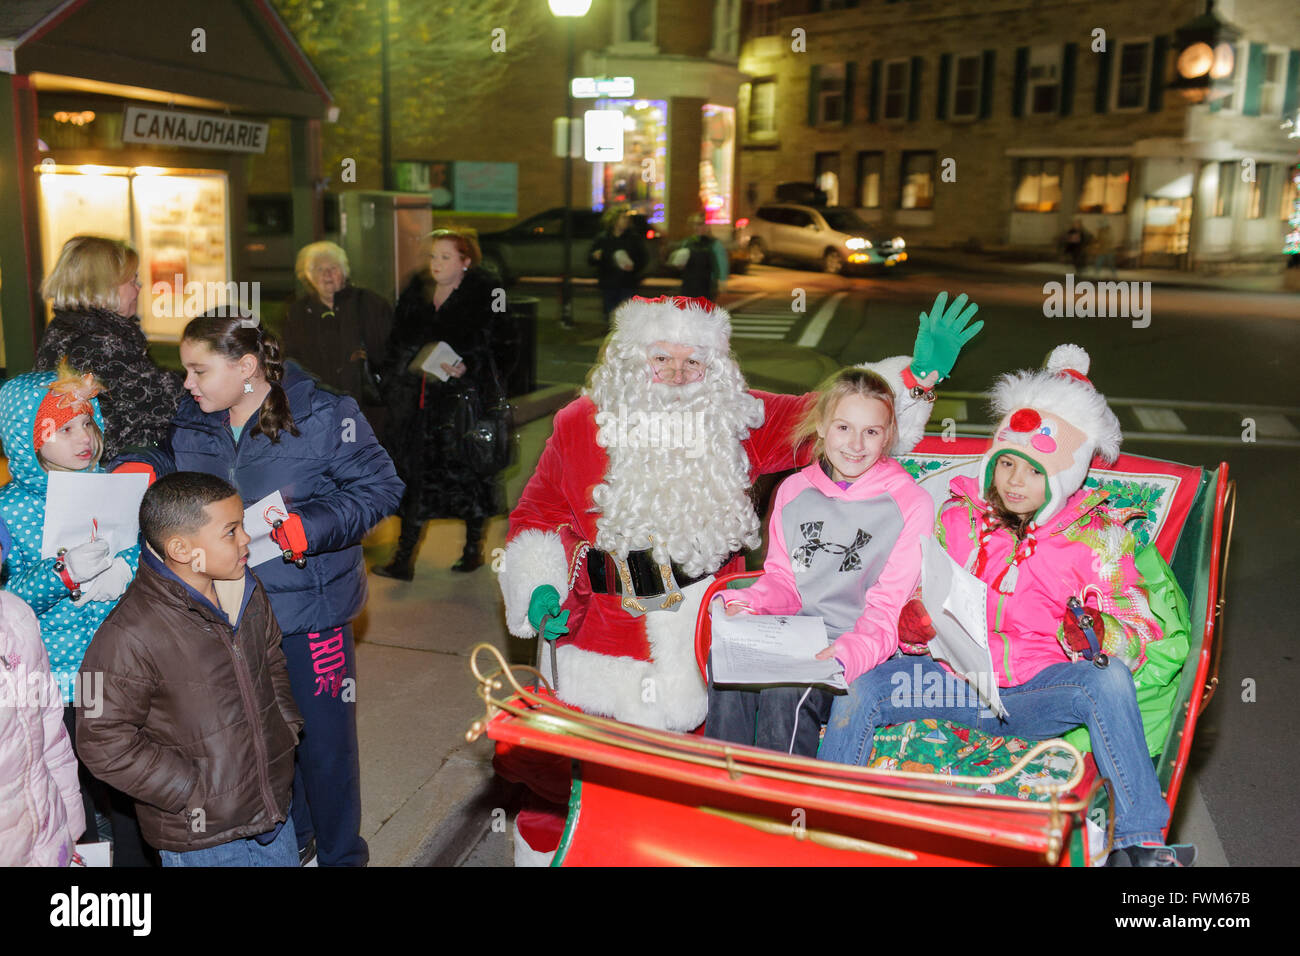 Boys and girls line up to go on a sleigh ride with Santa, Canajoharie, Mohawk Valley, New York, USA Stock Photo